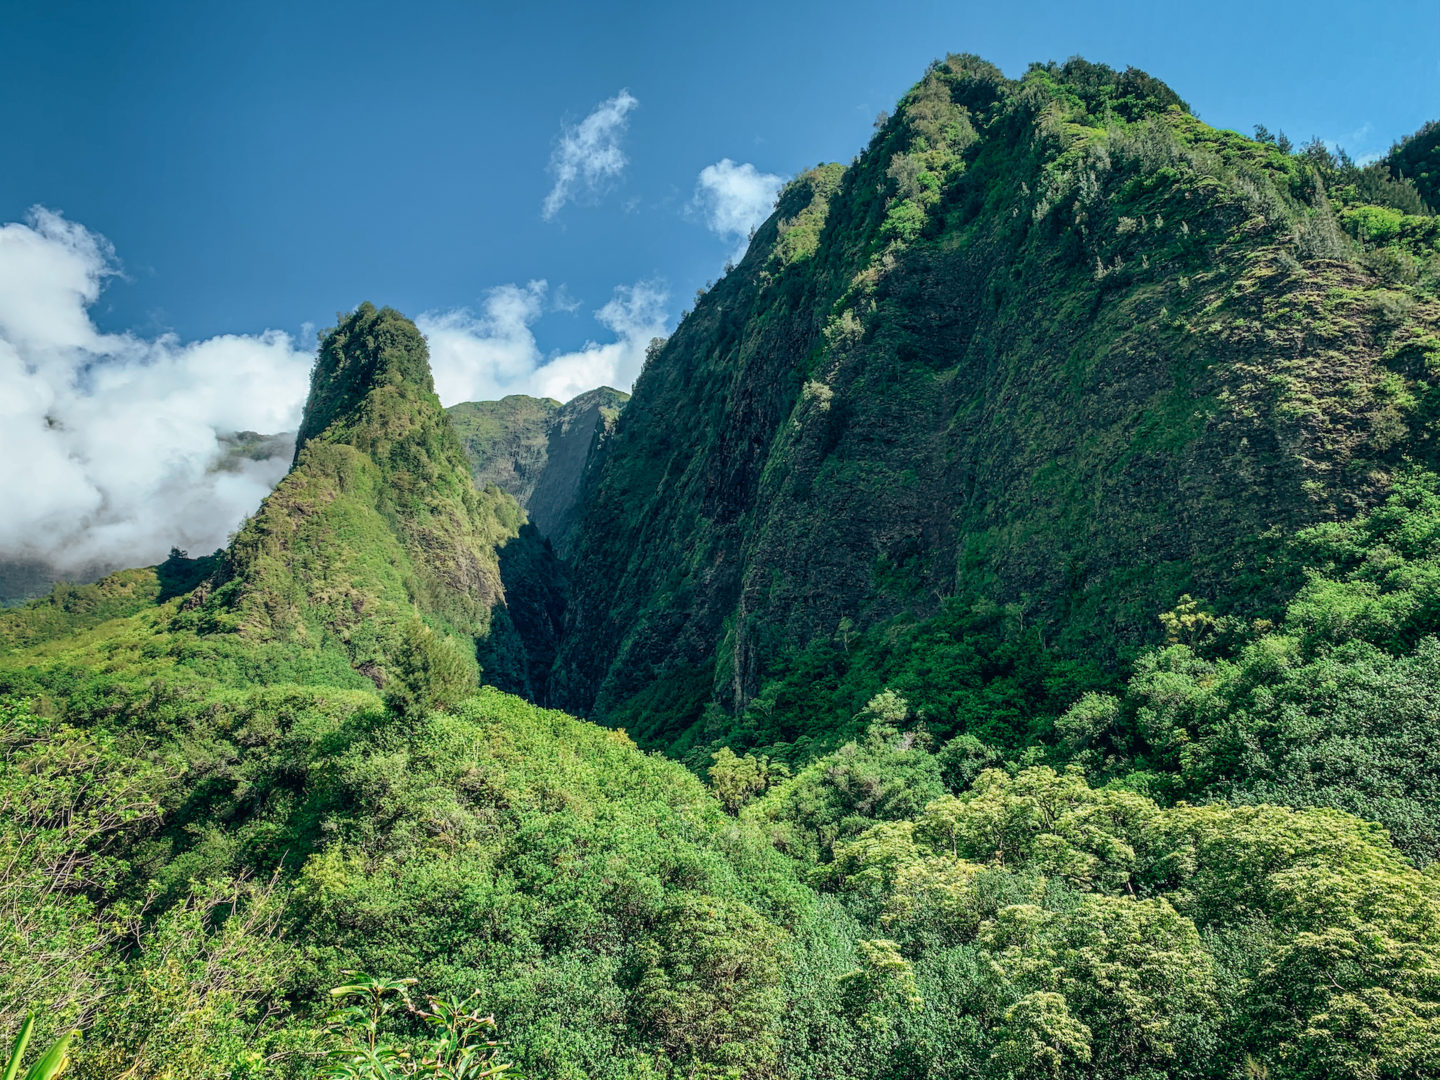 ‘Iao Valley State Monument and Park - Maui Hawai'i